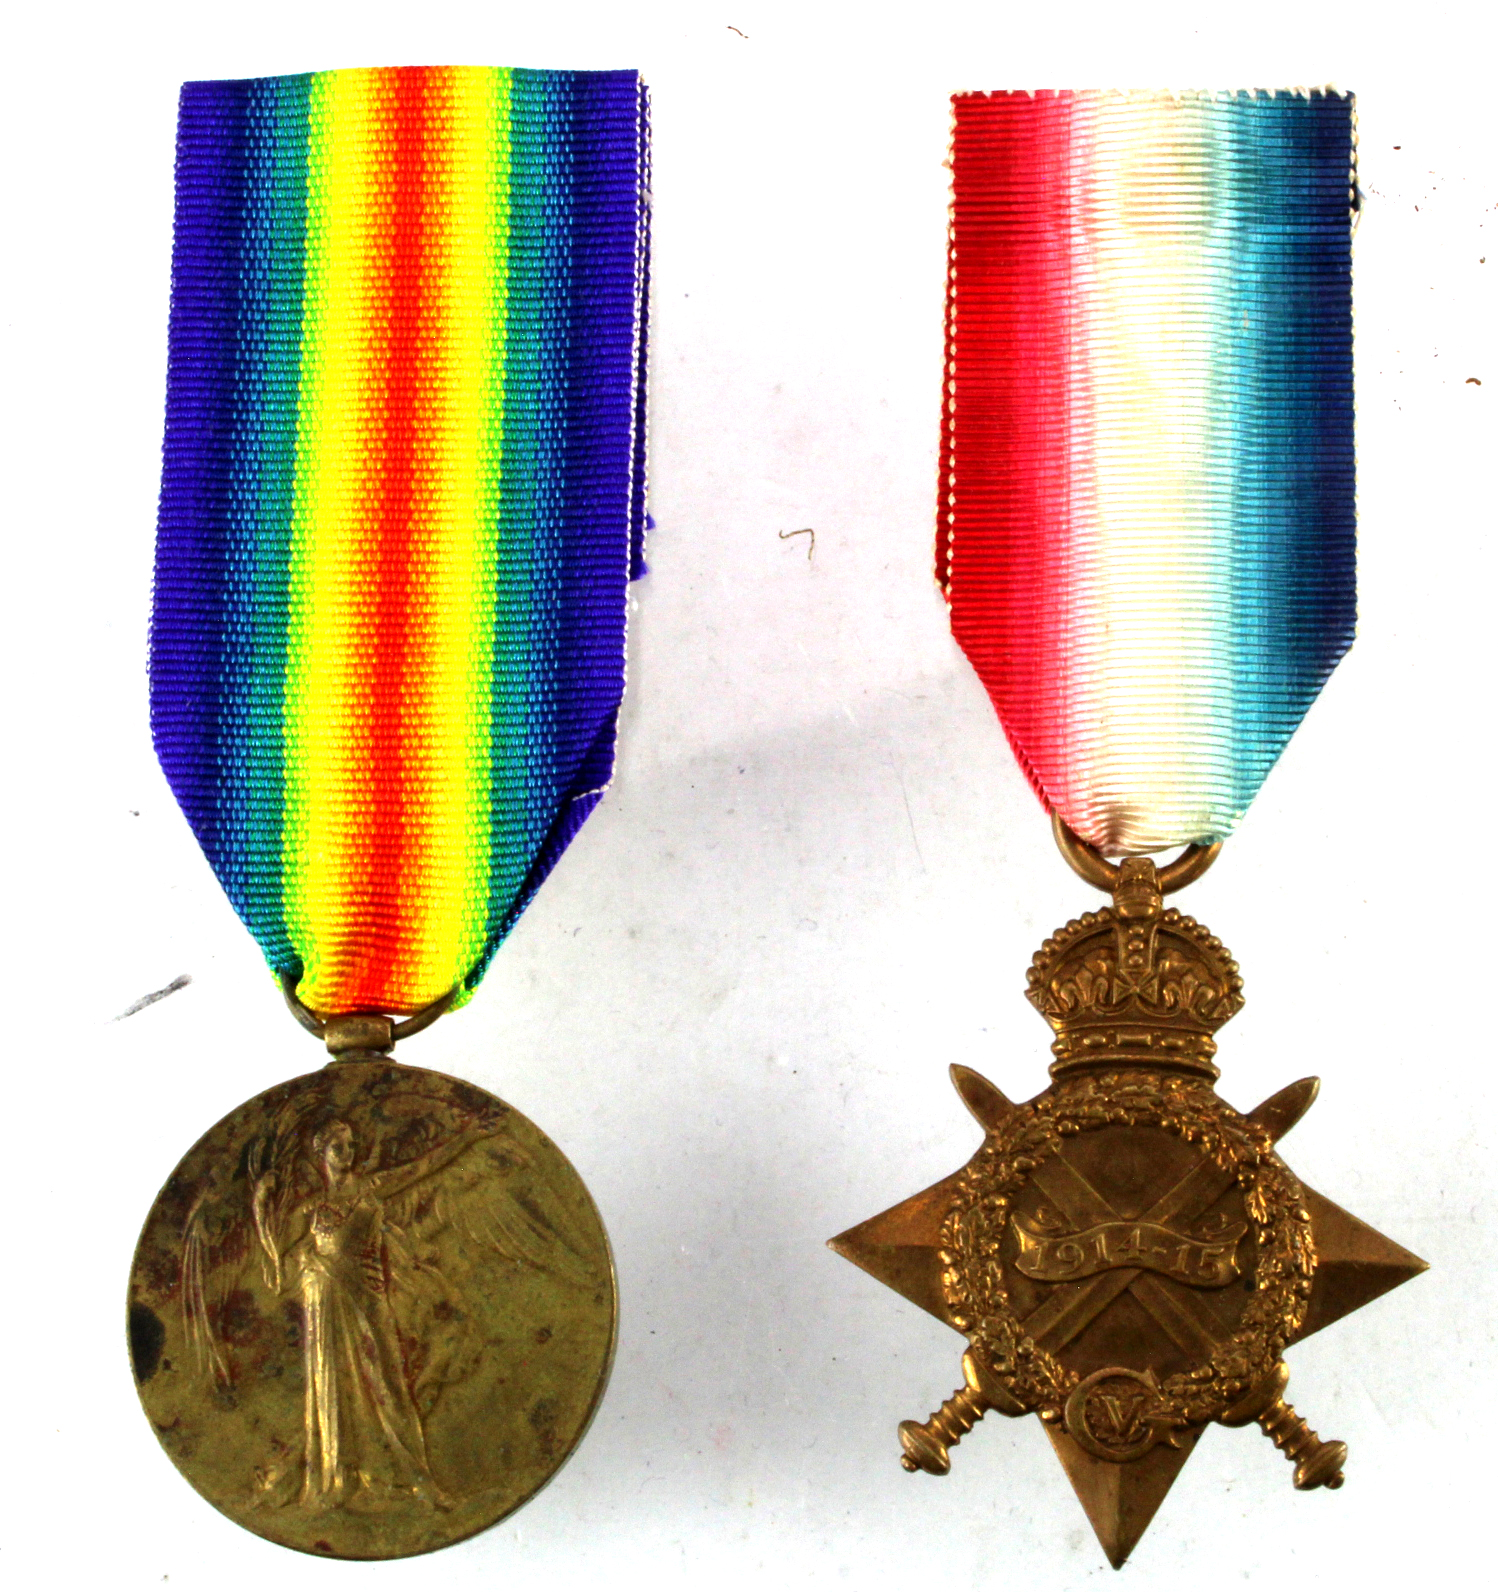 1915 Star and Victory medals both named to native soldiers.